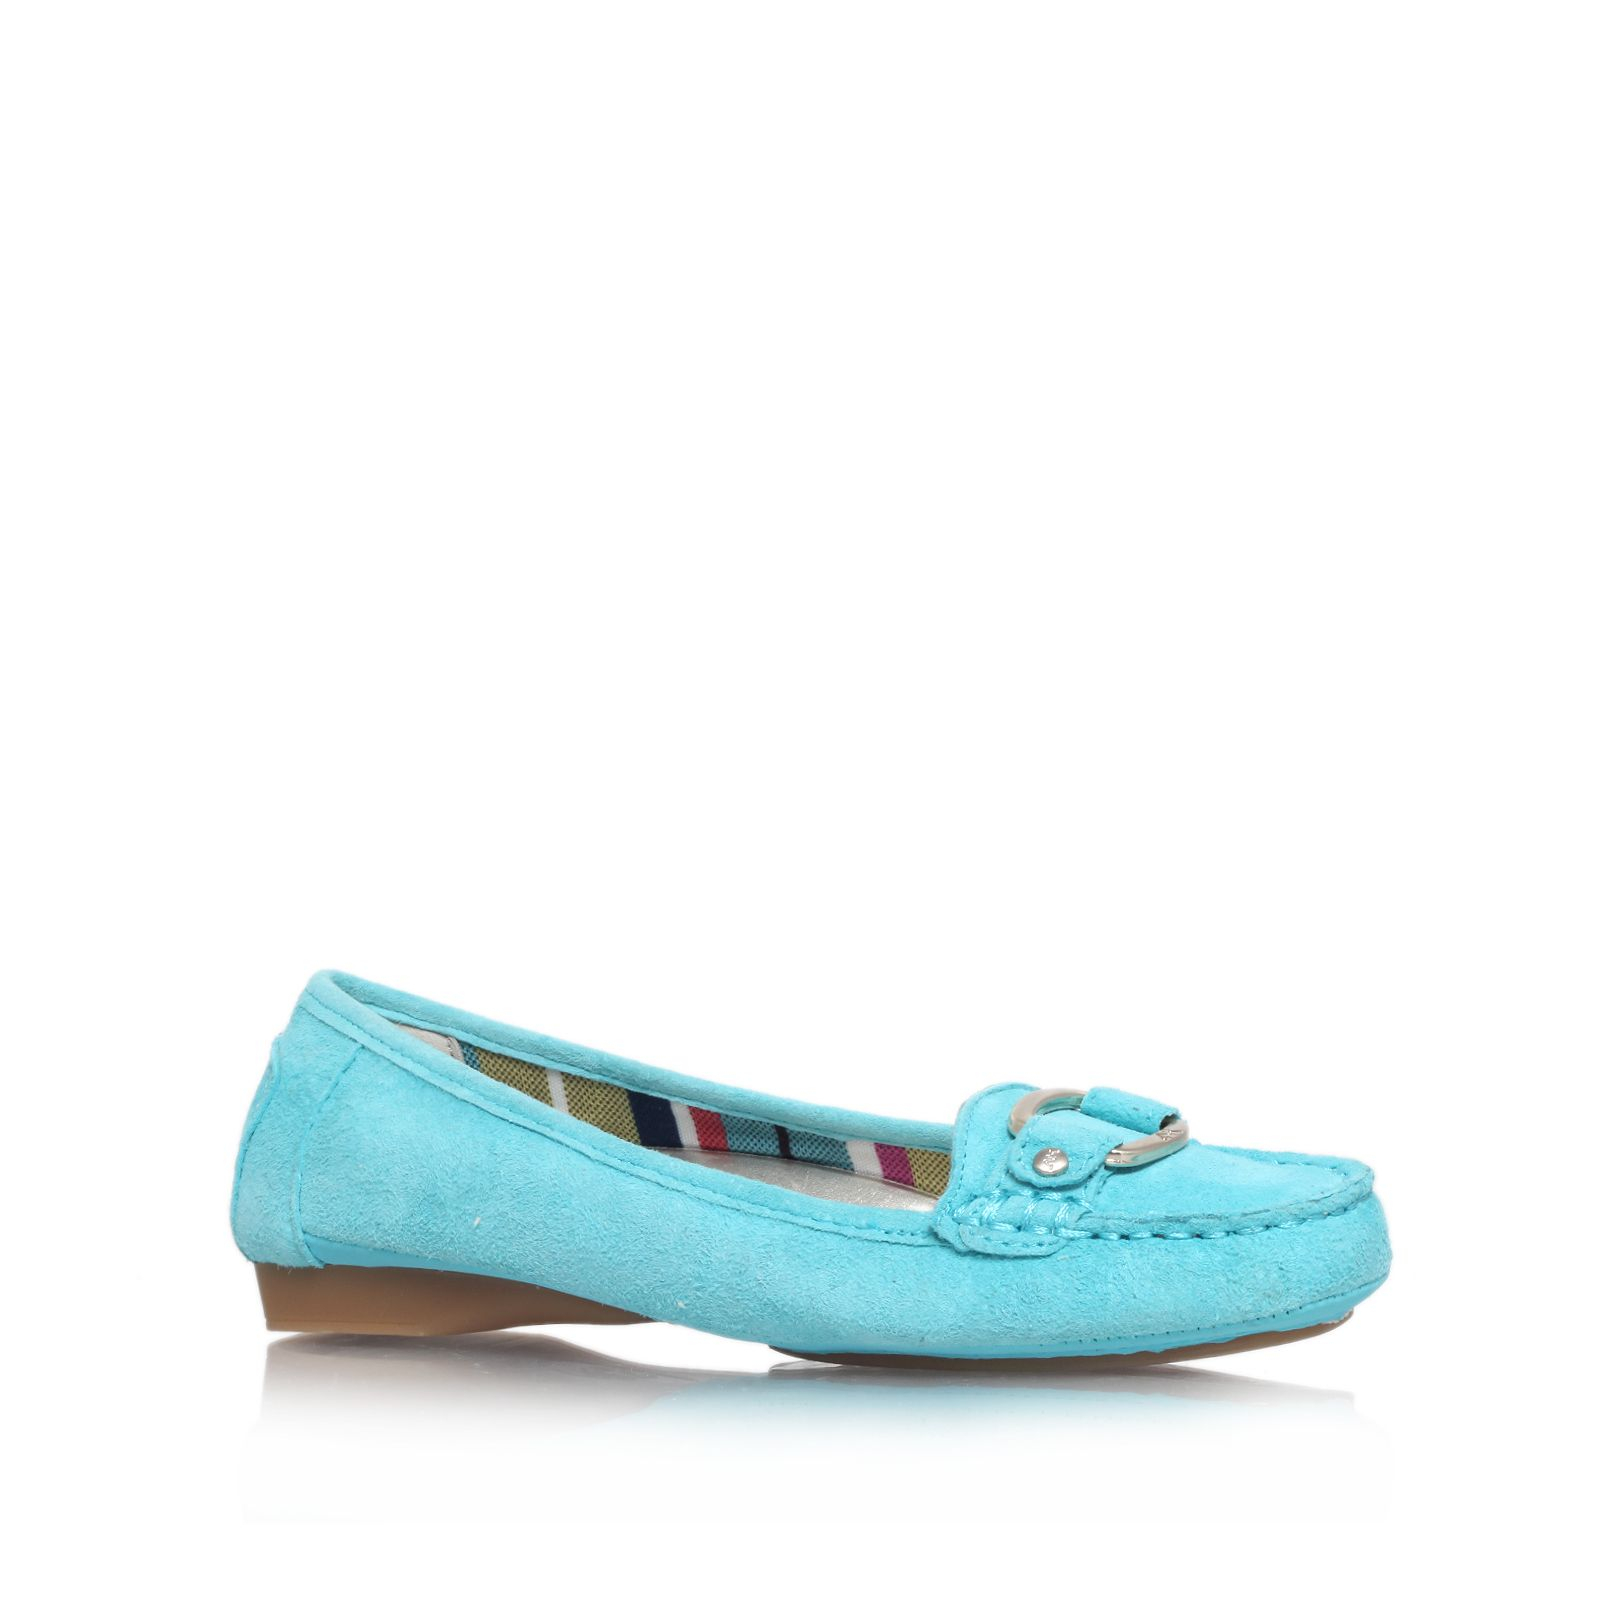 Anne Klein Pythia6 Flat Loafer Shoes in Blue (Turquoise) | Lyst